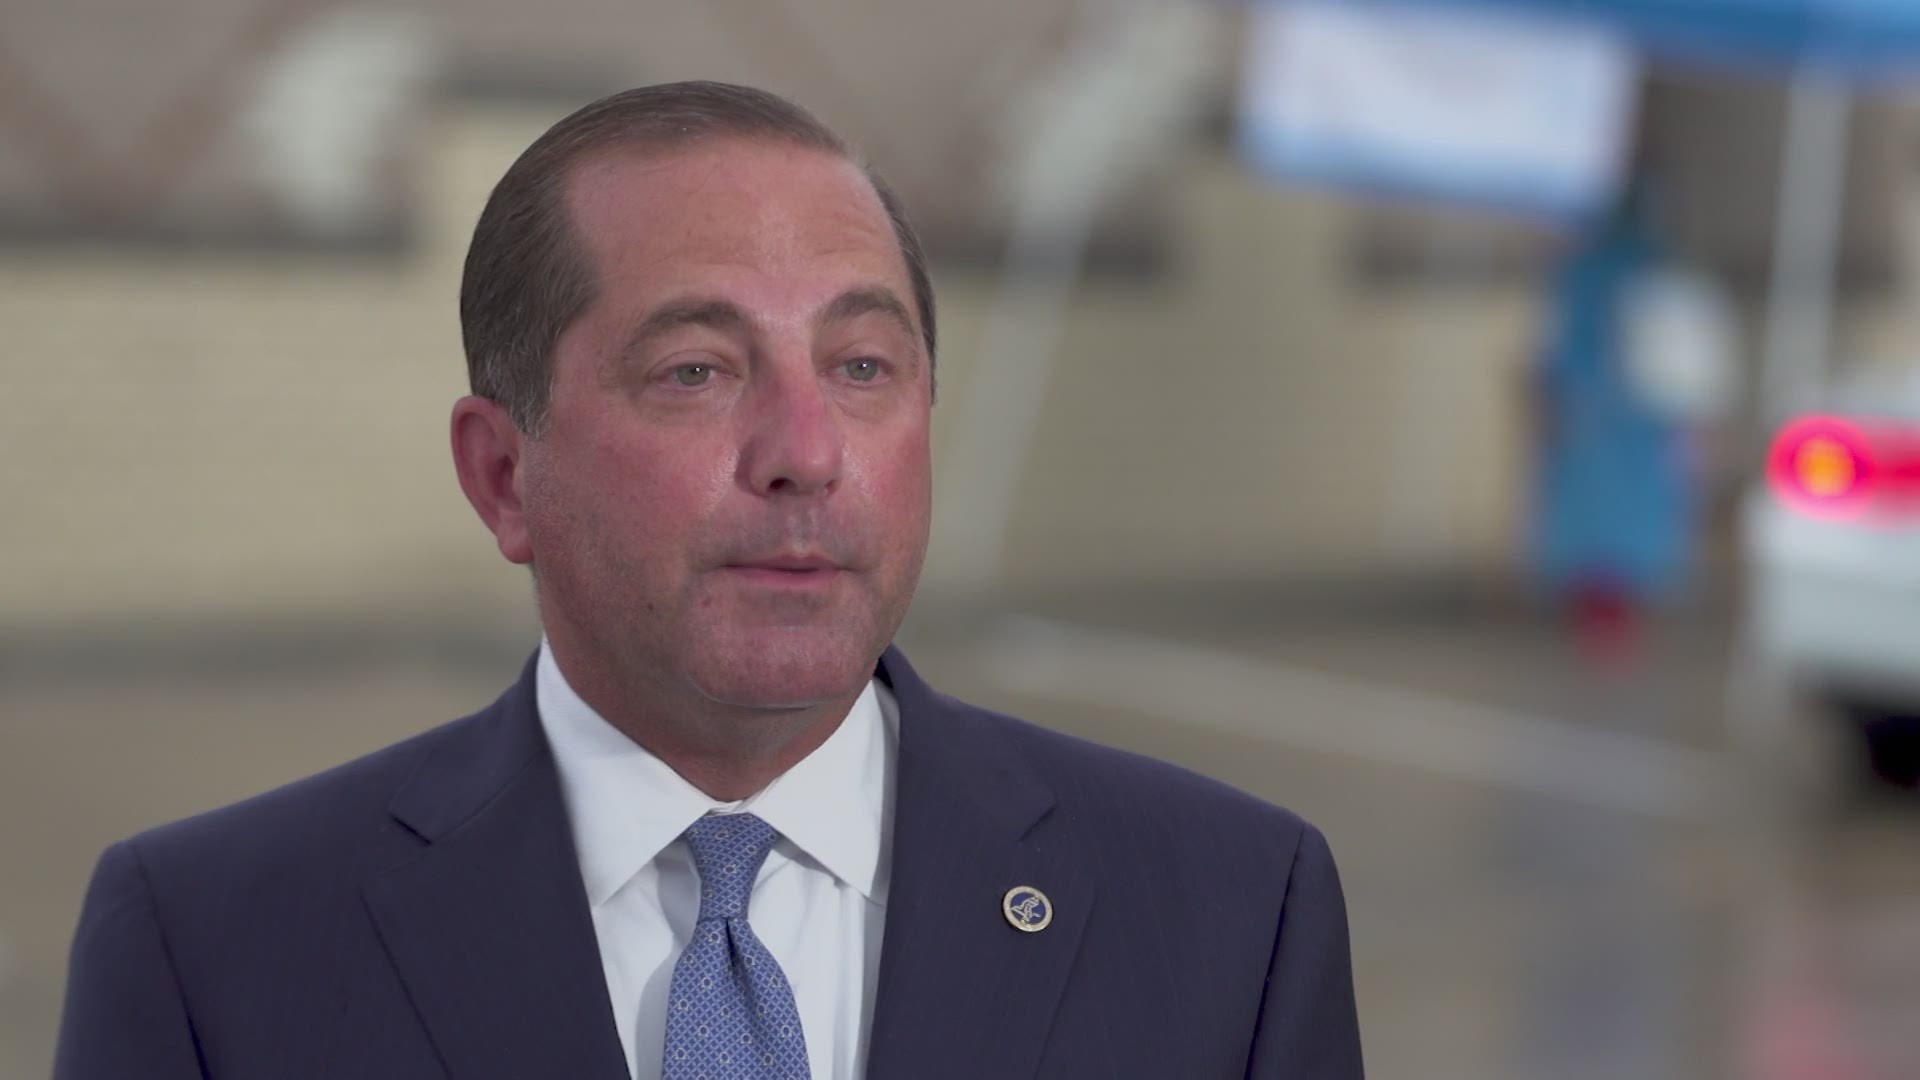 "It is very credible that we could have tens – the high tens of millions of doses – of FDA-approved vaccine this year,” Secretary Azar told WFAA.